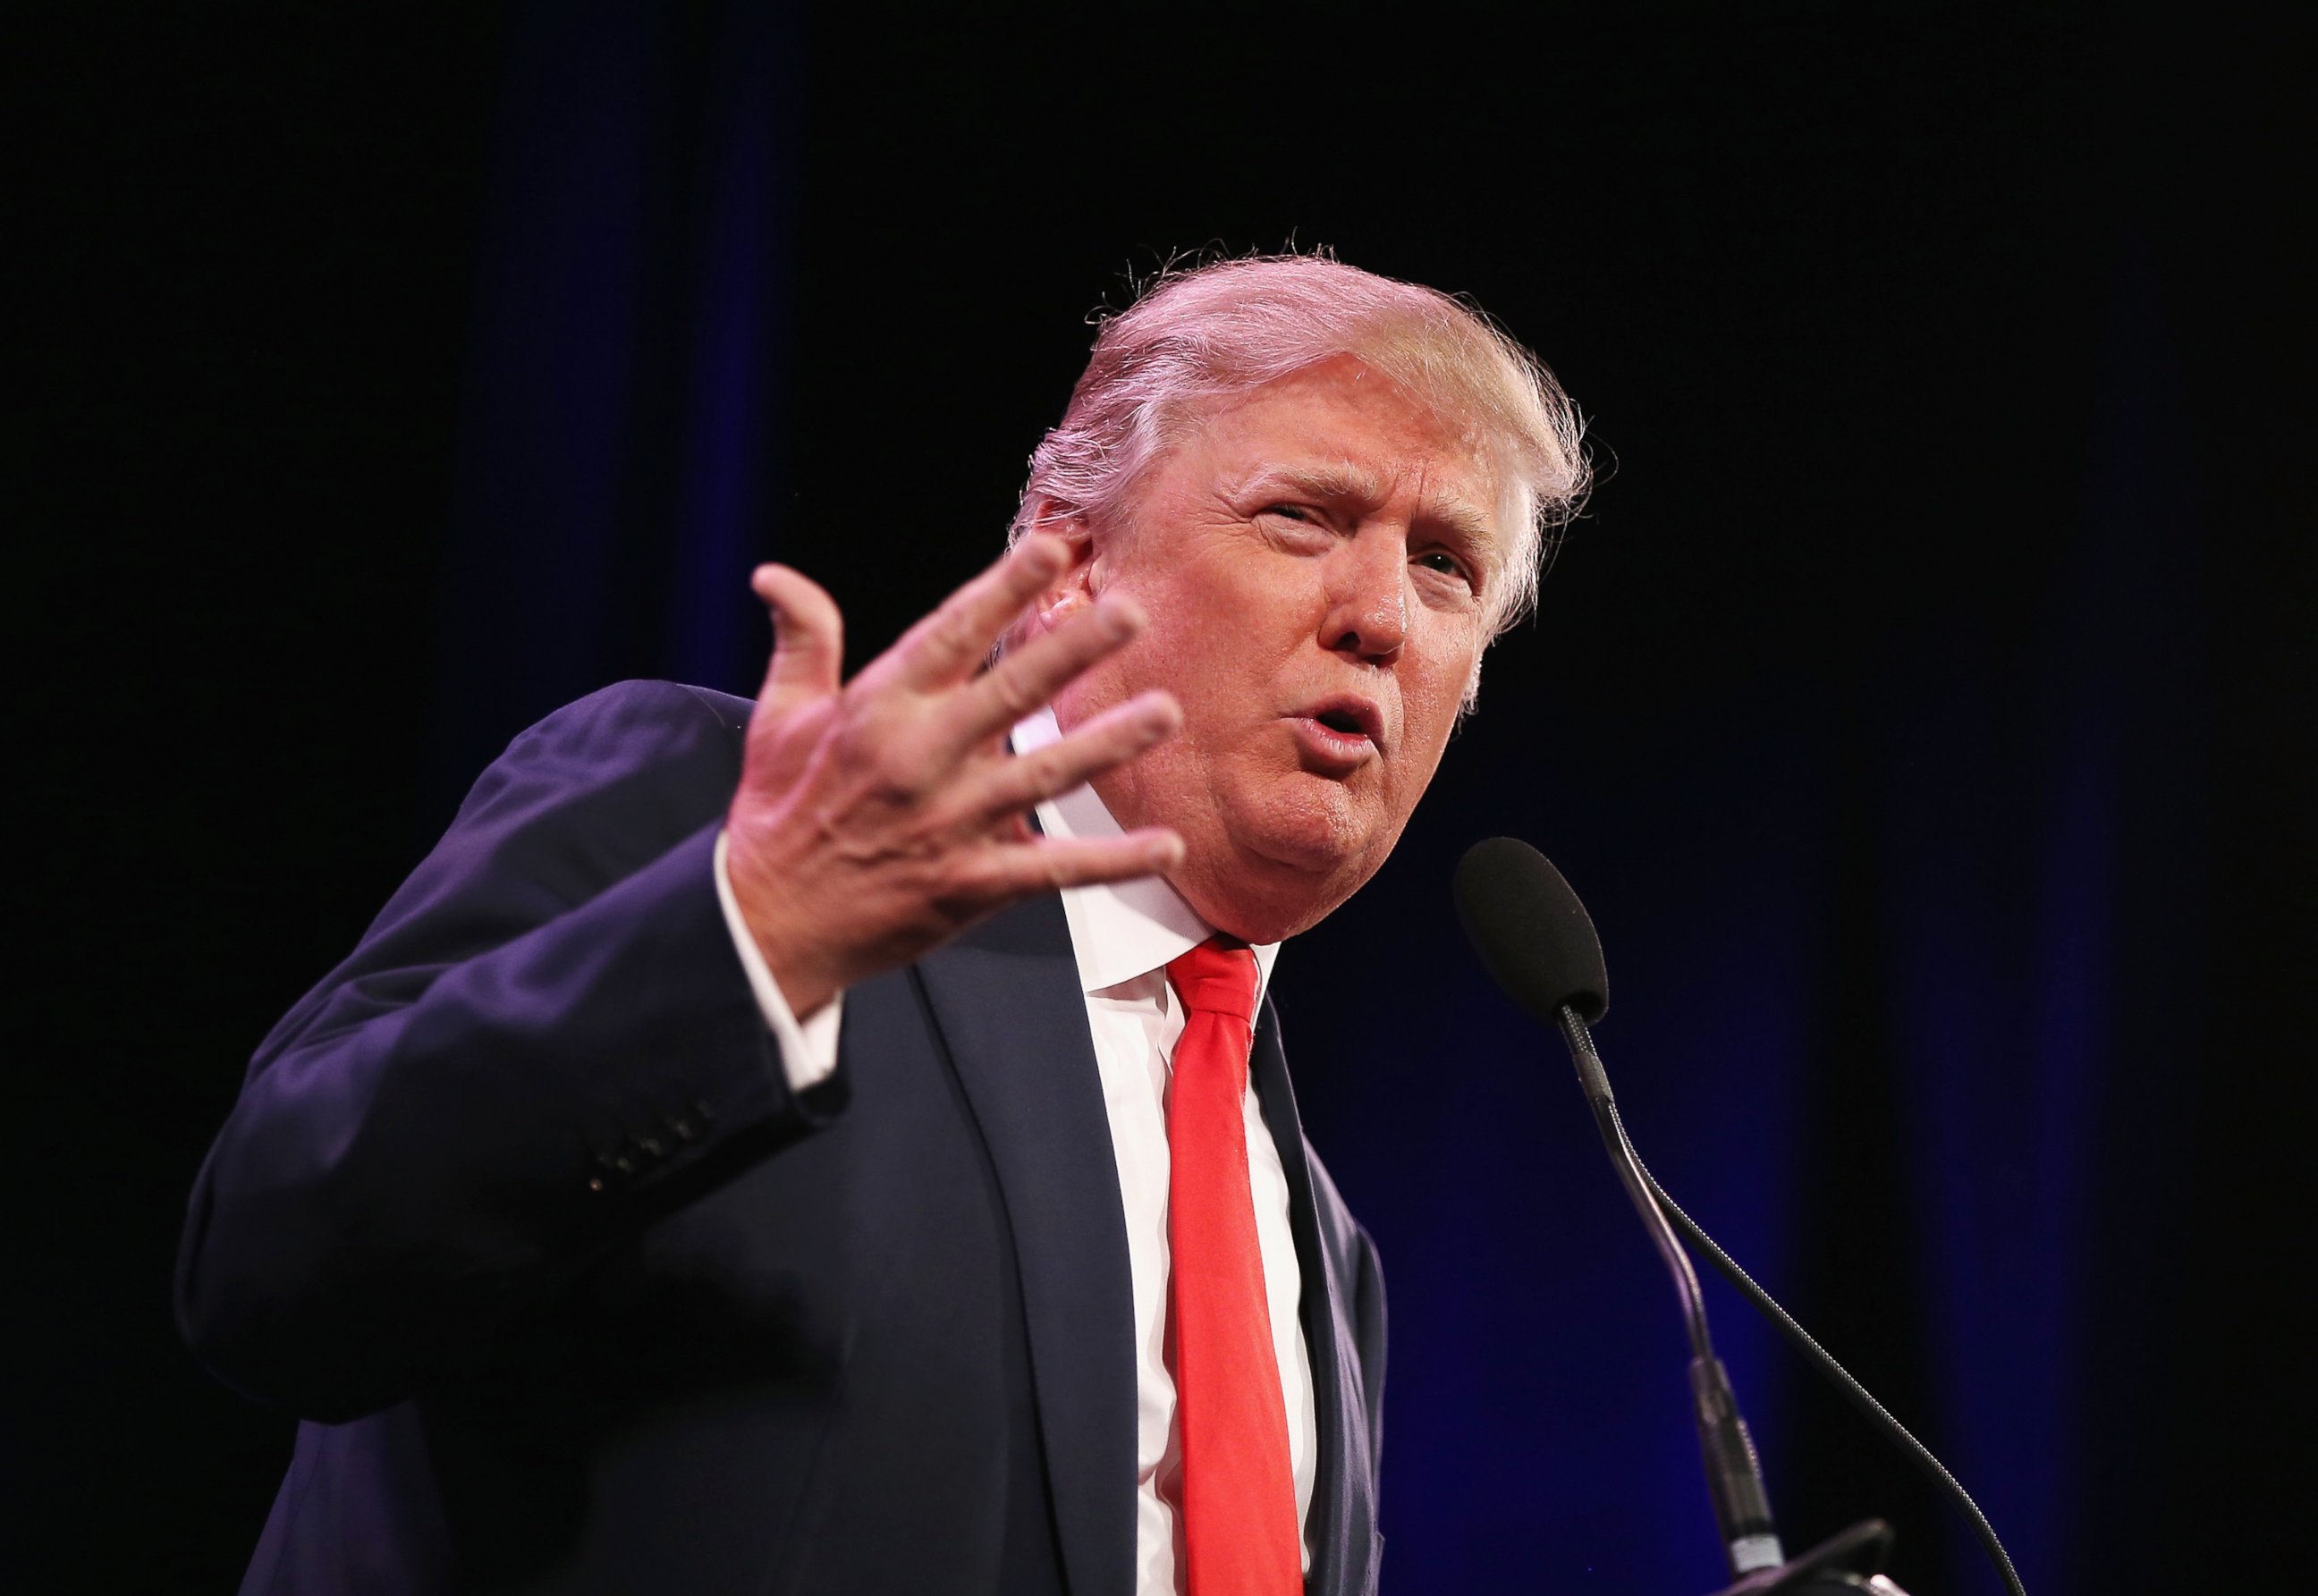 PHOTO: Donald Trump speaks to guests at the Iowa Freedom Summit on Jan. 24, 2015 in Des Moines, Iowa.